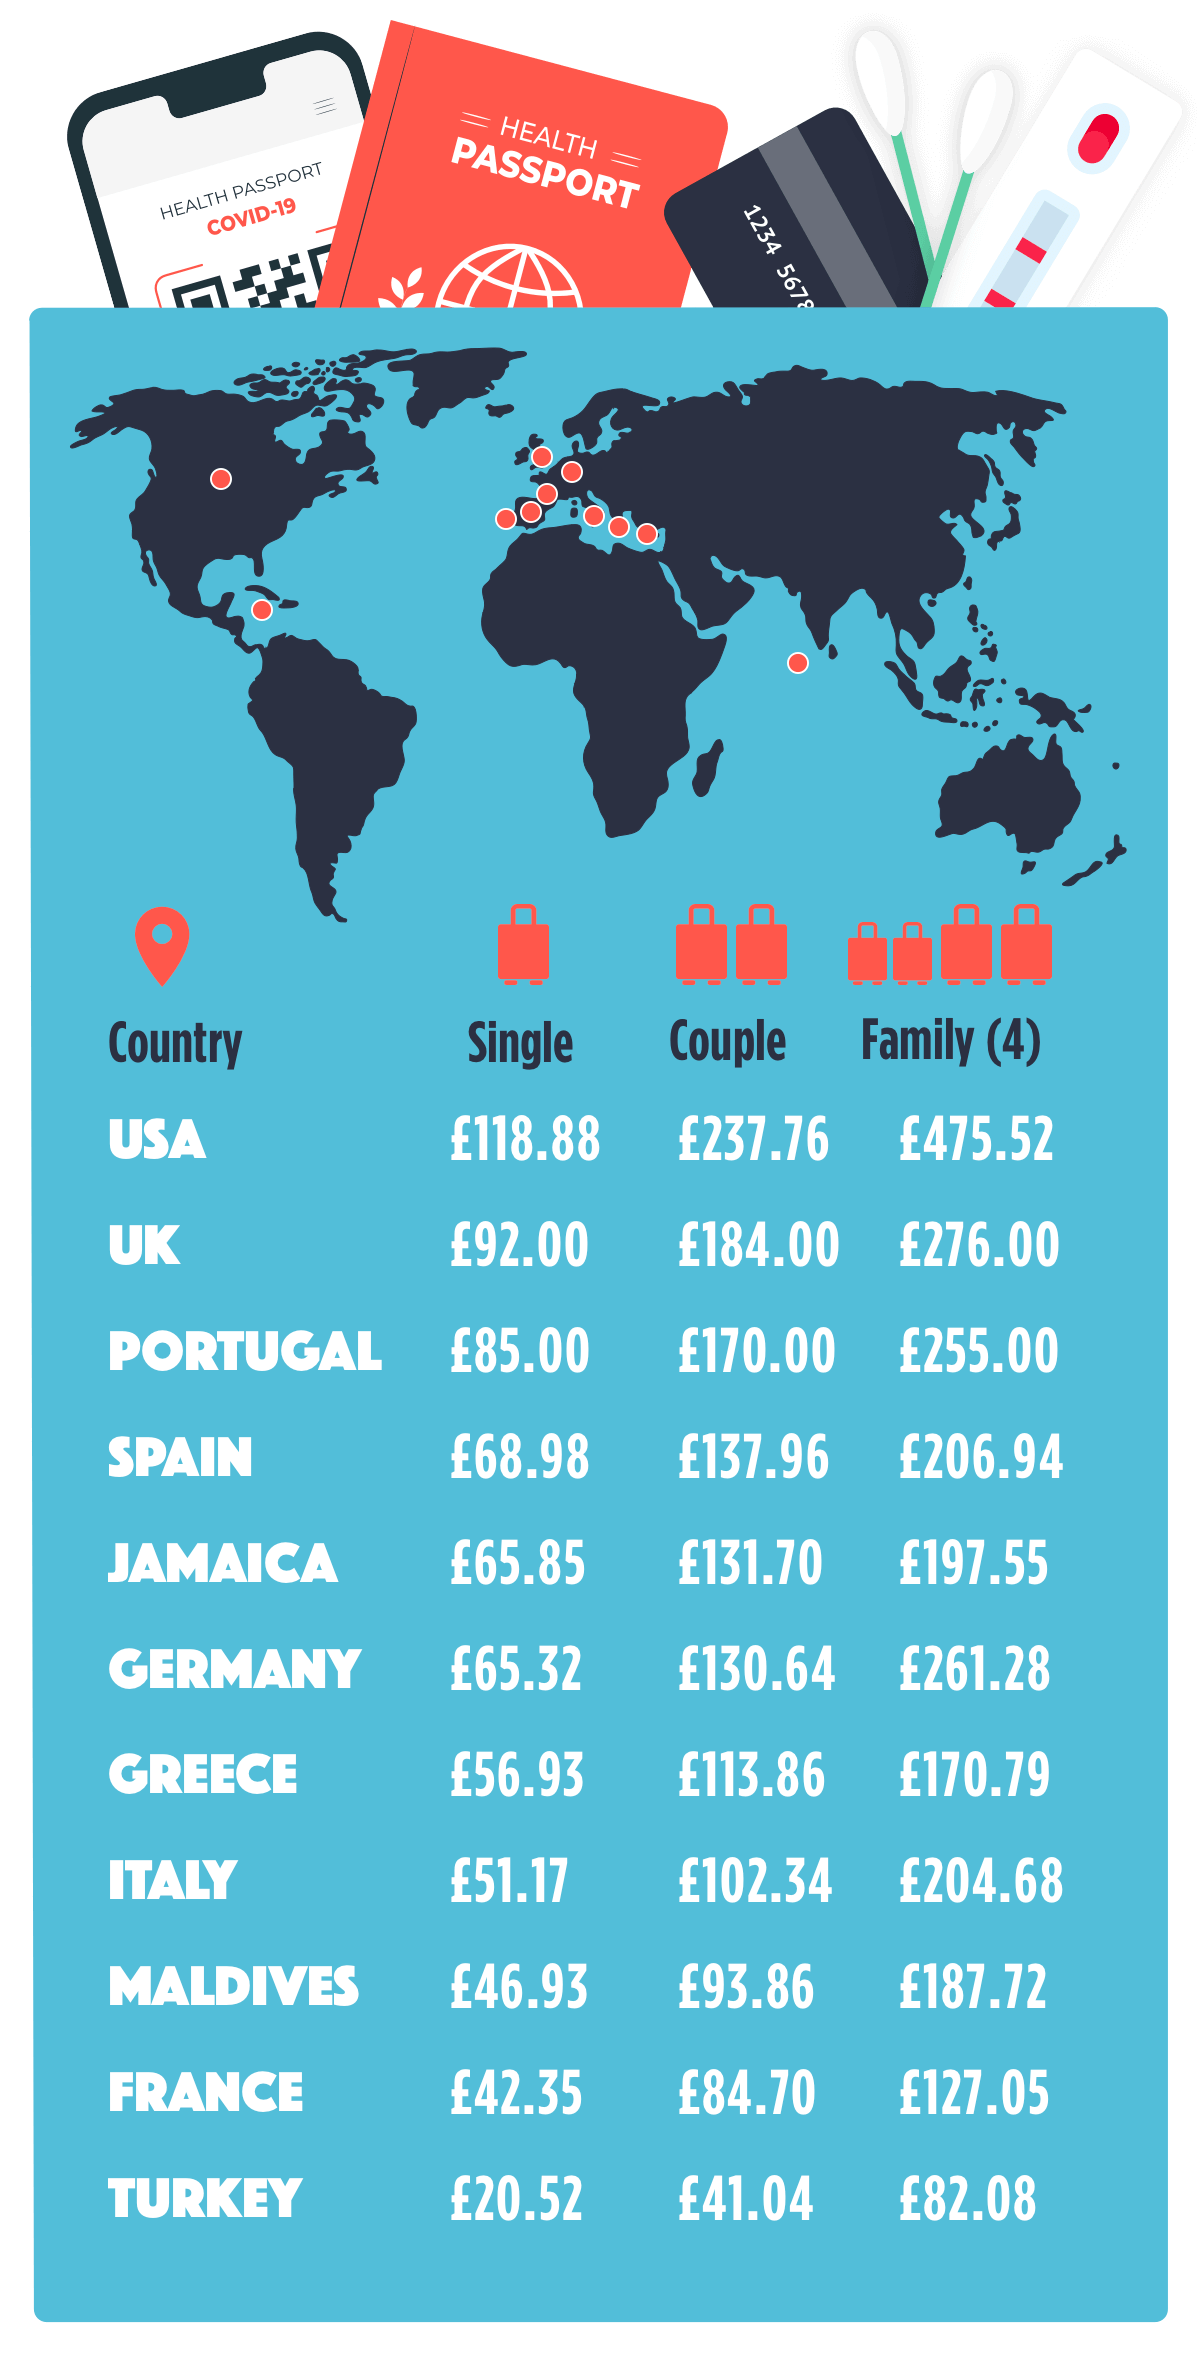 Infographic showing the average cost of covid tests in different countries